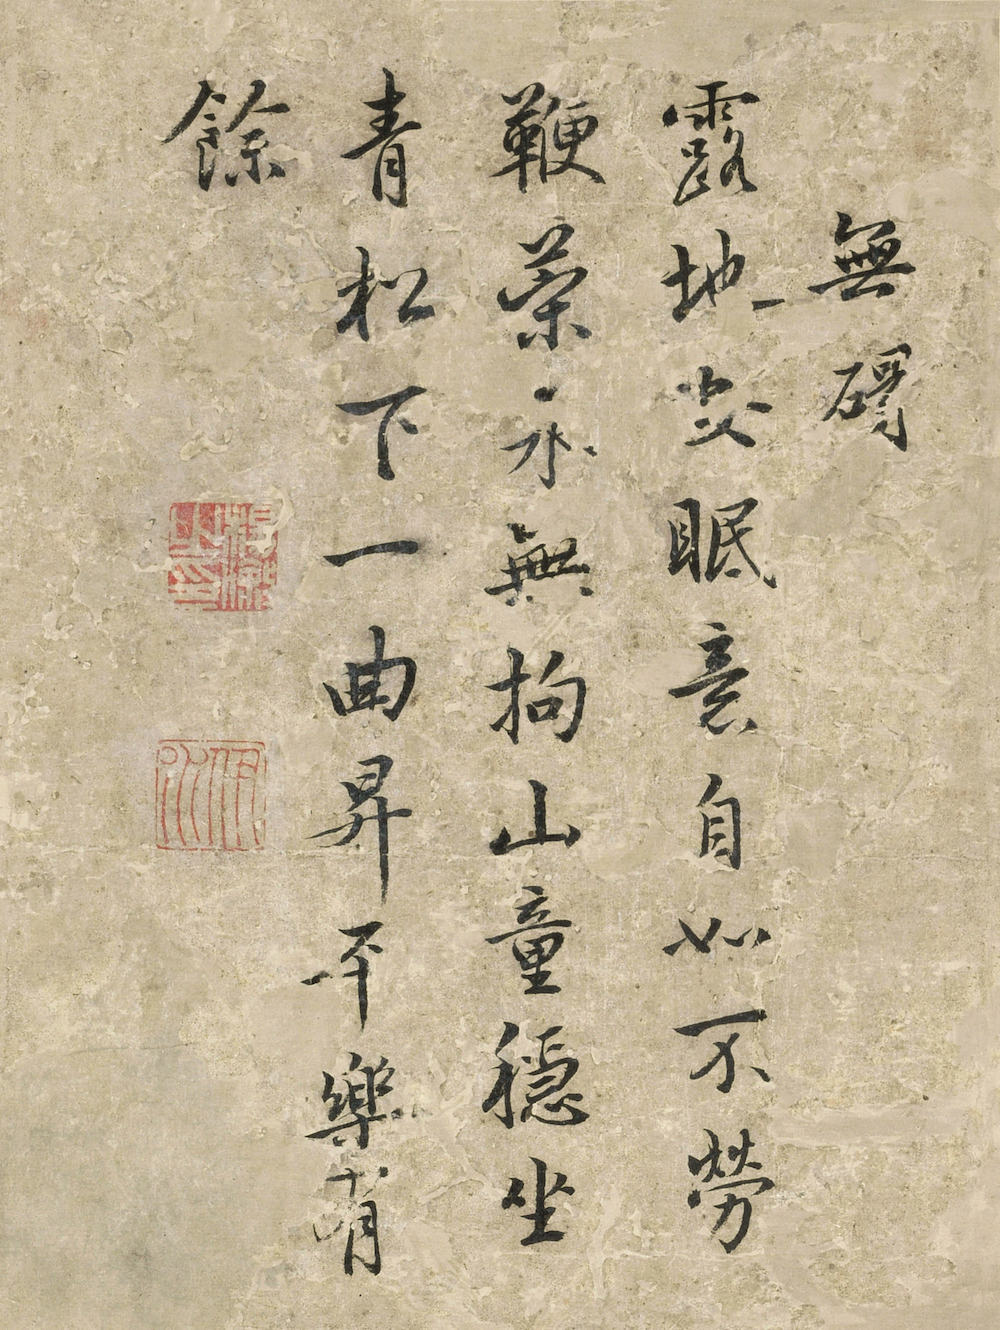 (Ming) Zhang Mu's Cattle Cattle Atlas · Unhindered, ink and color on paper, 23.7 cm in length, 17.7 cm in width, donated by Mr. Yang Quan, collected by Guangzhou Art Museum